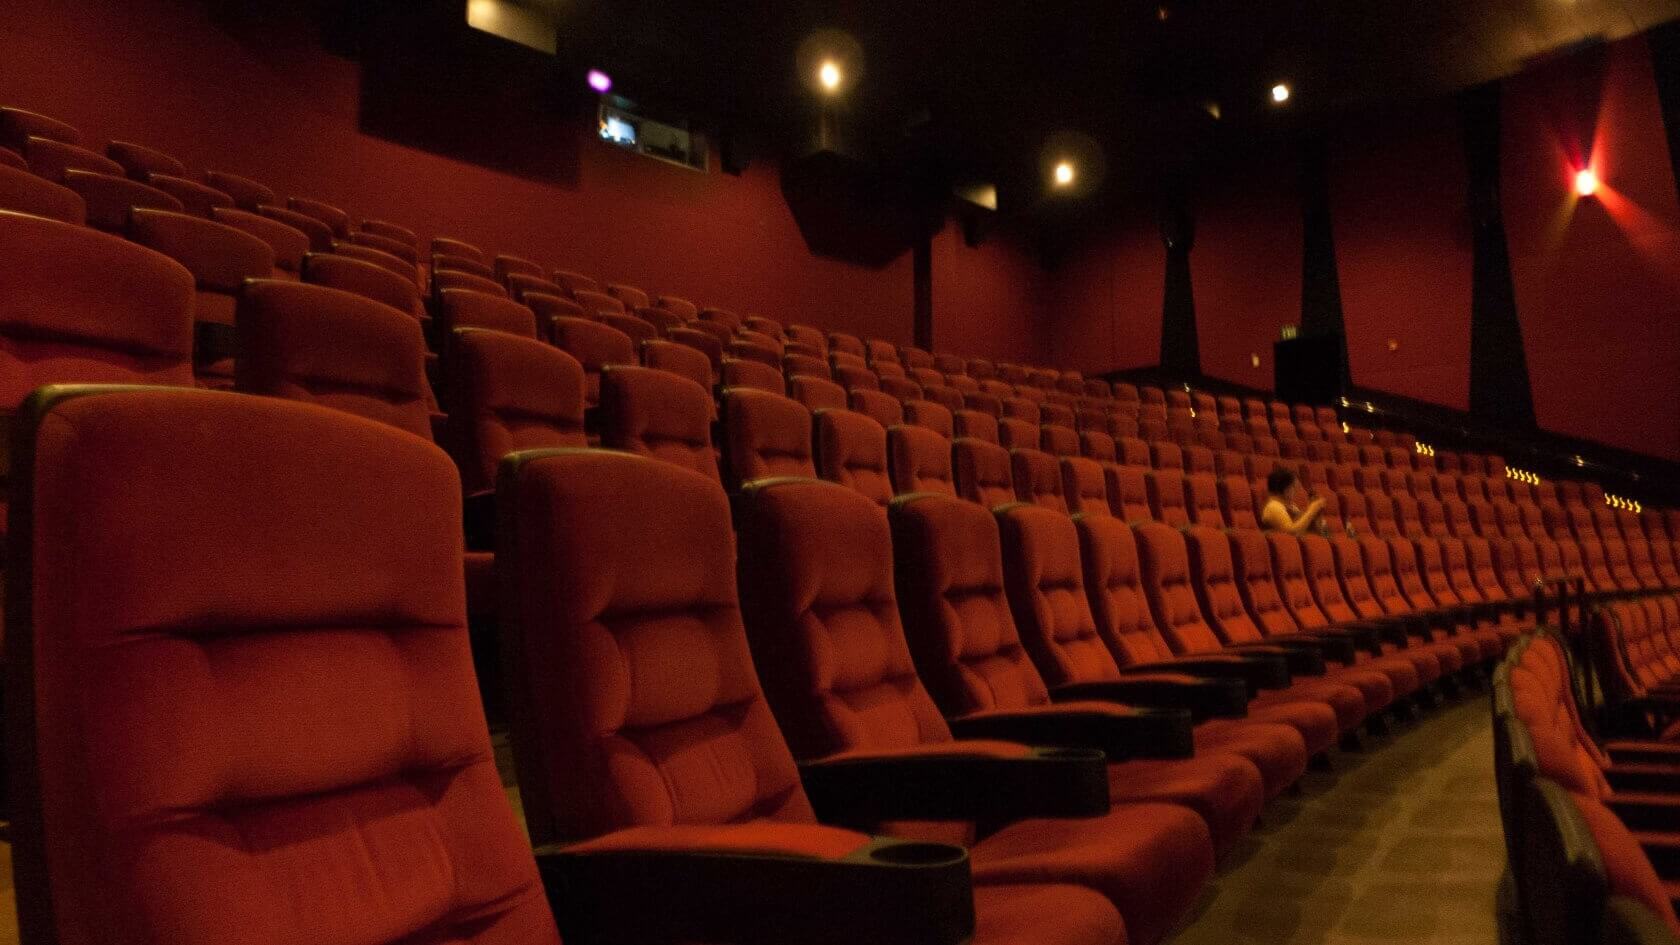 Sinemia drops the price of its cheapest monthly movie ticket plan to $3.99 for weekday showings